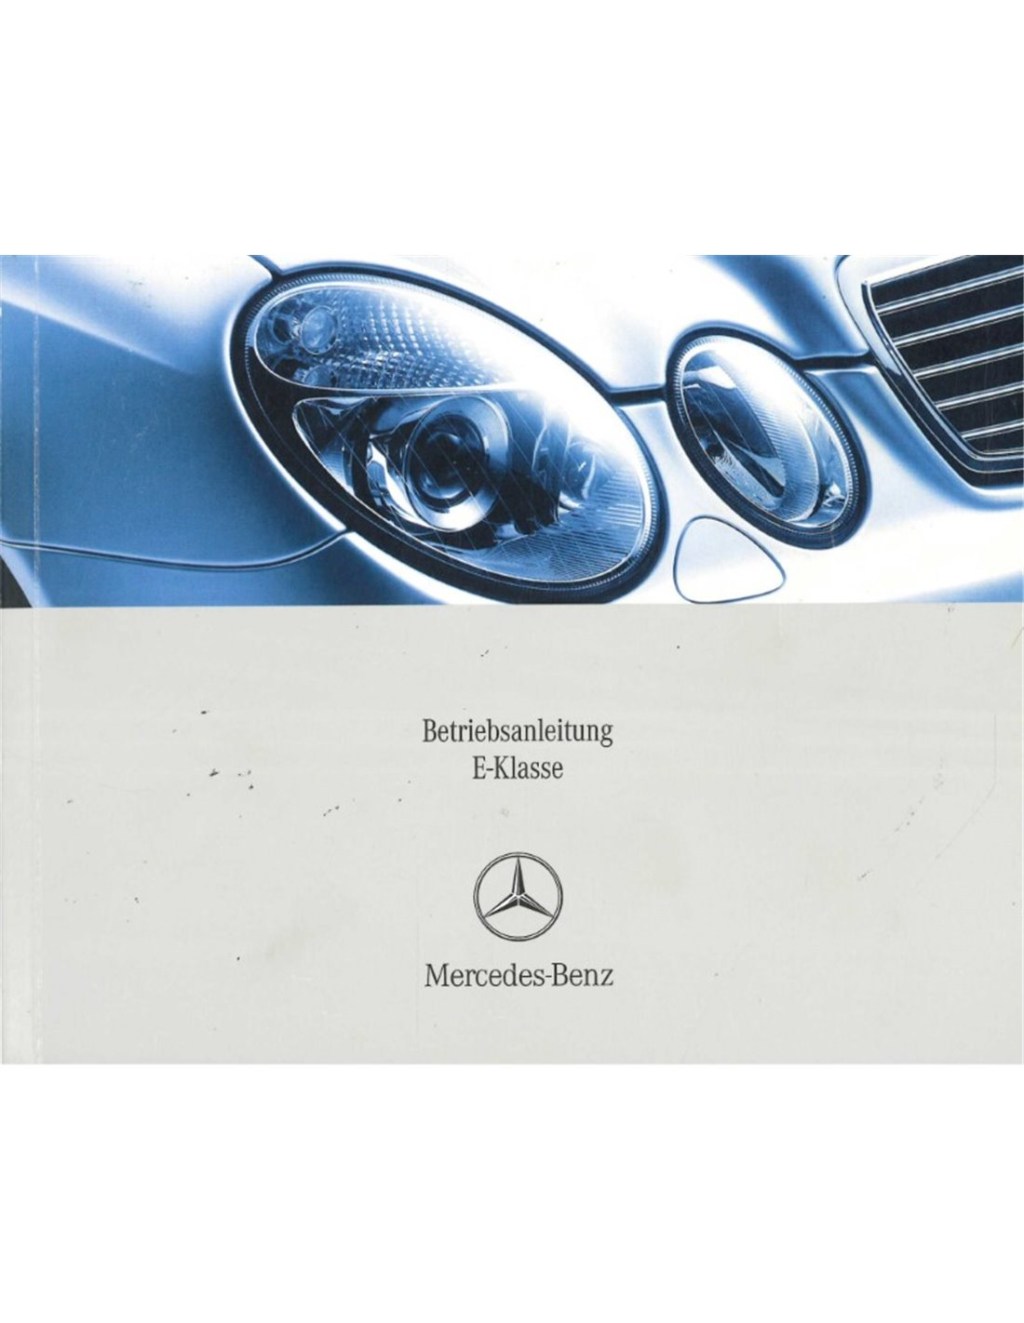 Picture of: MERCEDES BENZ E CLASS OWNERS MANUAL GERMAN